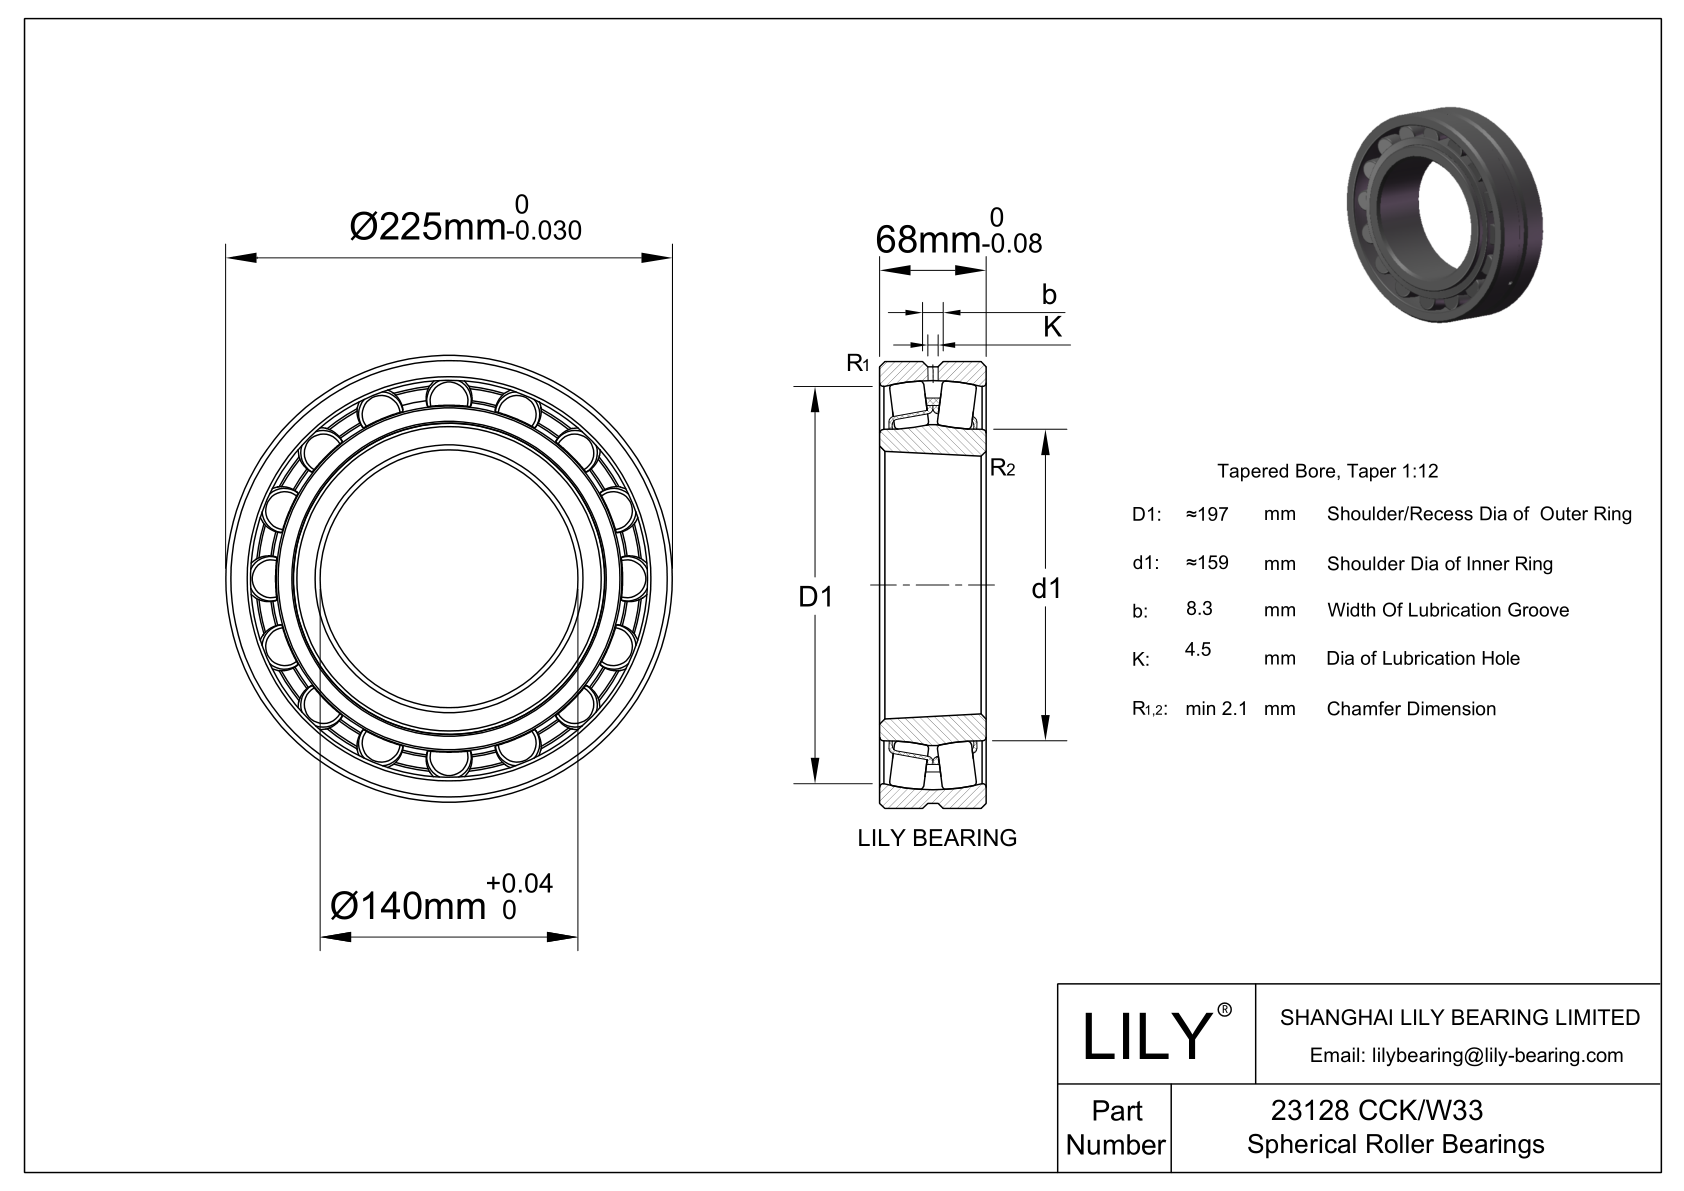 23128 CCK/W33 Double Row Spherical Roller Bearing cad drawing